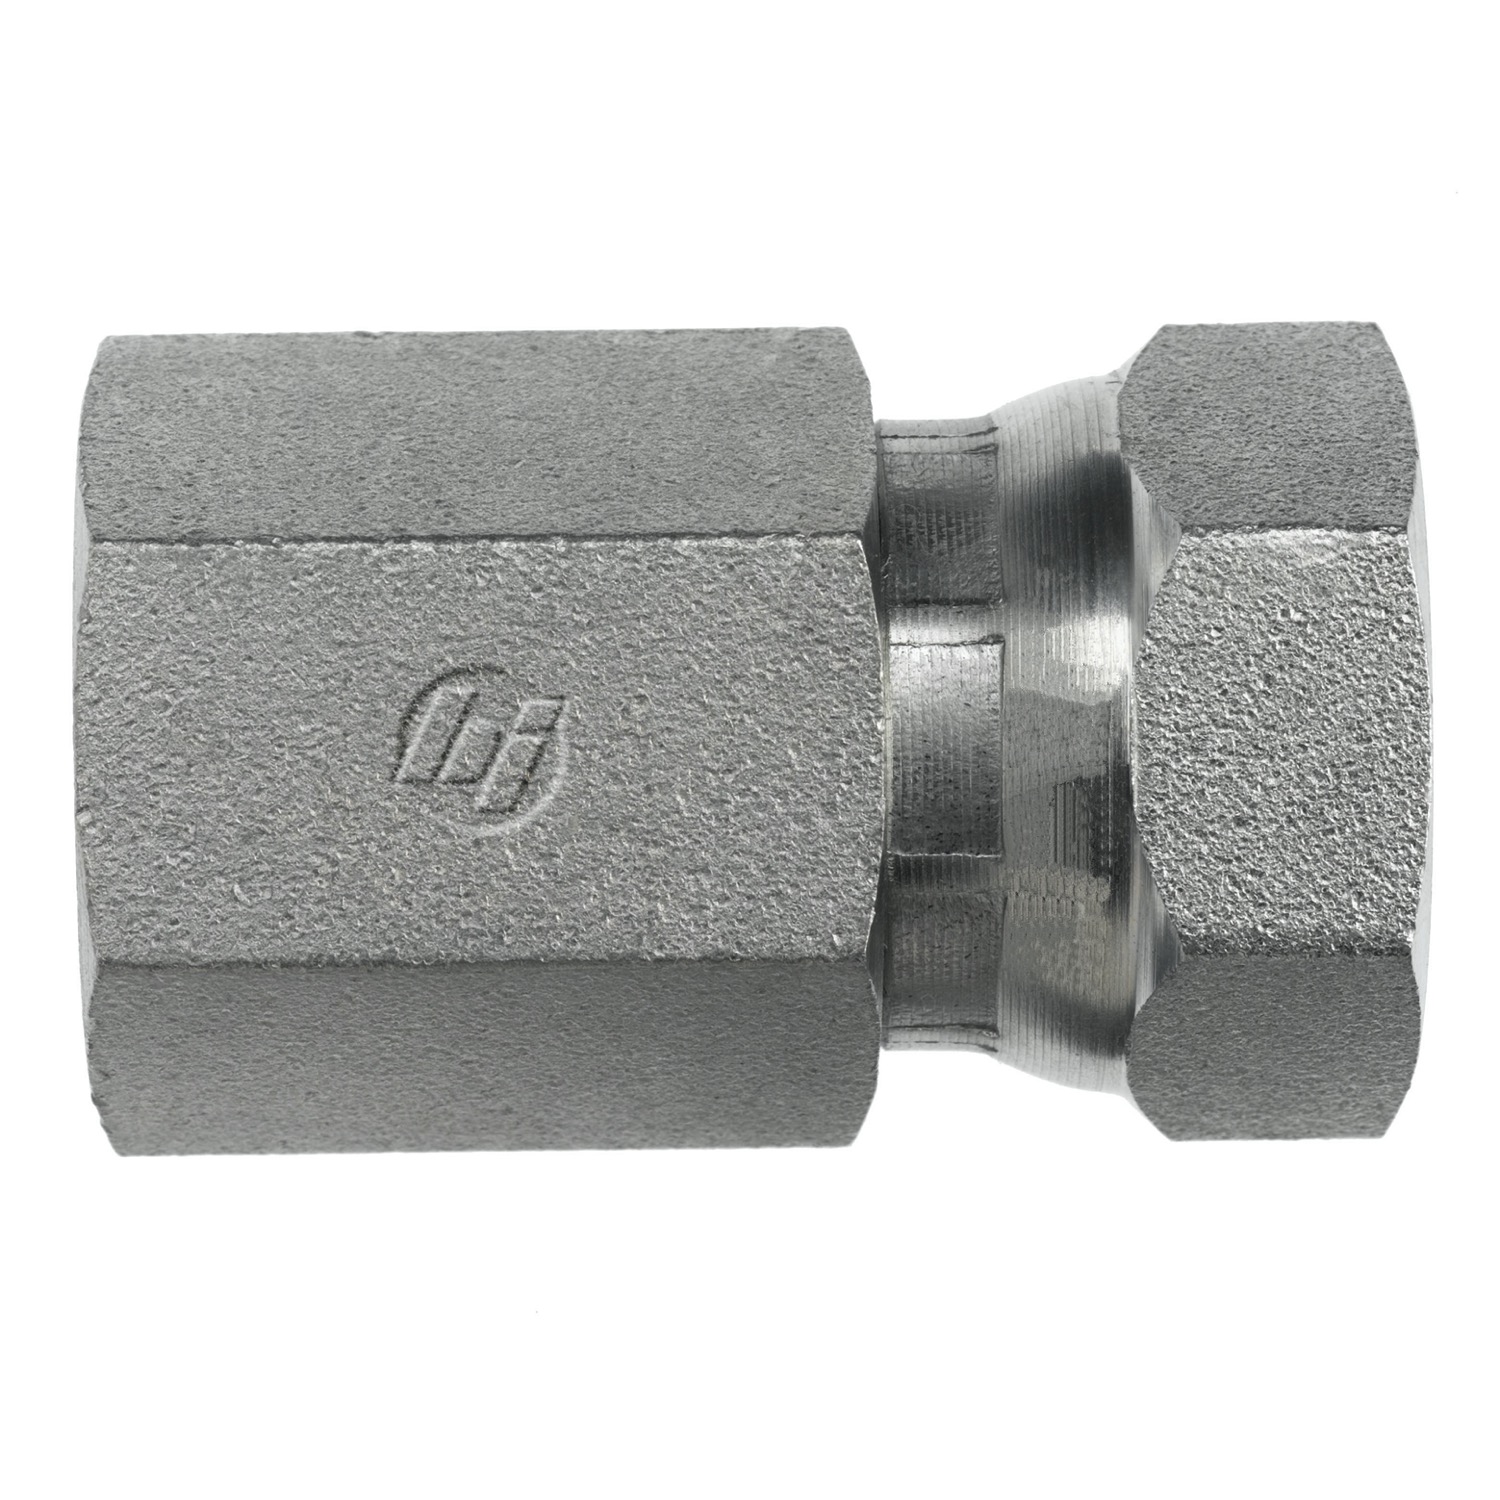 Hydraulic Hose Adapters - Straight Fitting, NPTF to NPSM, 1405 Series